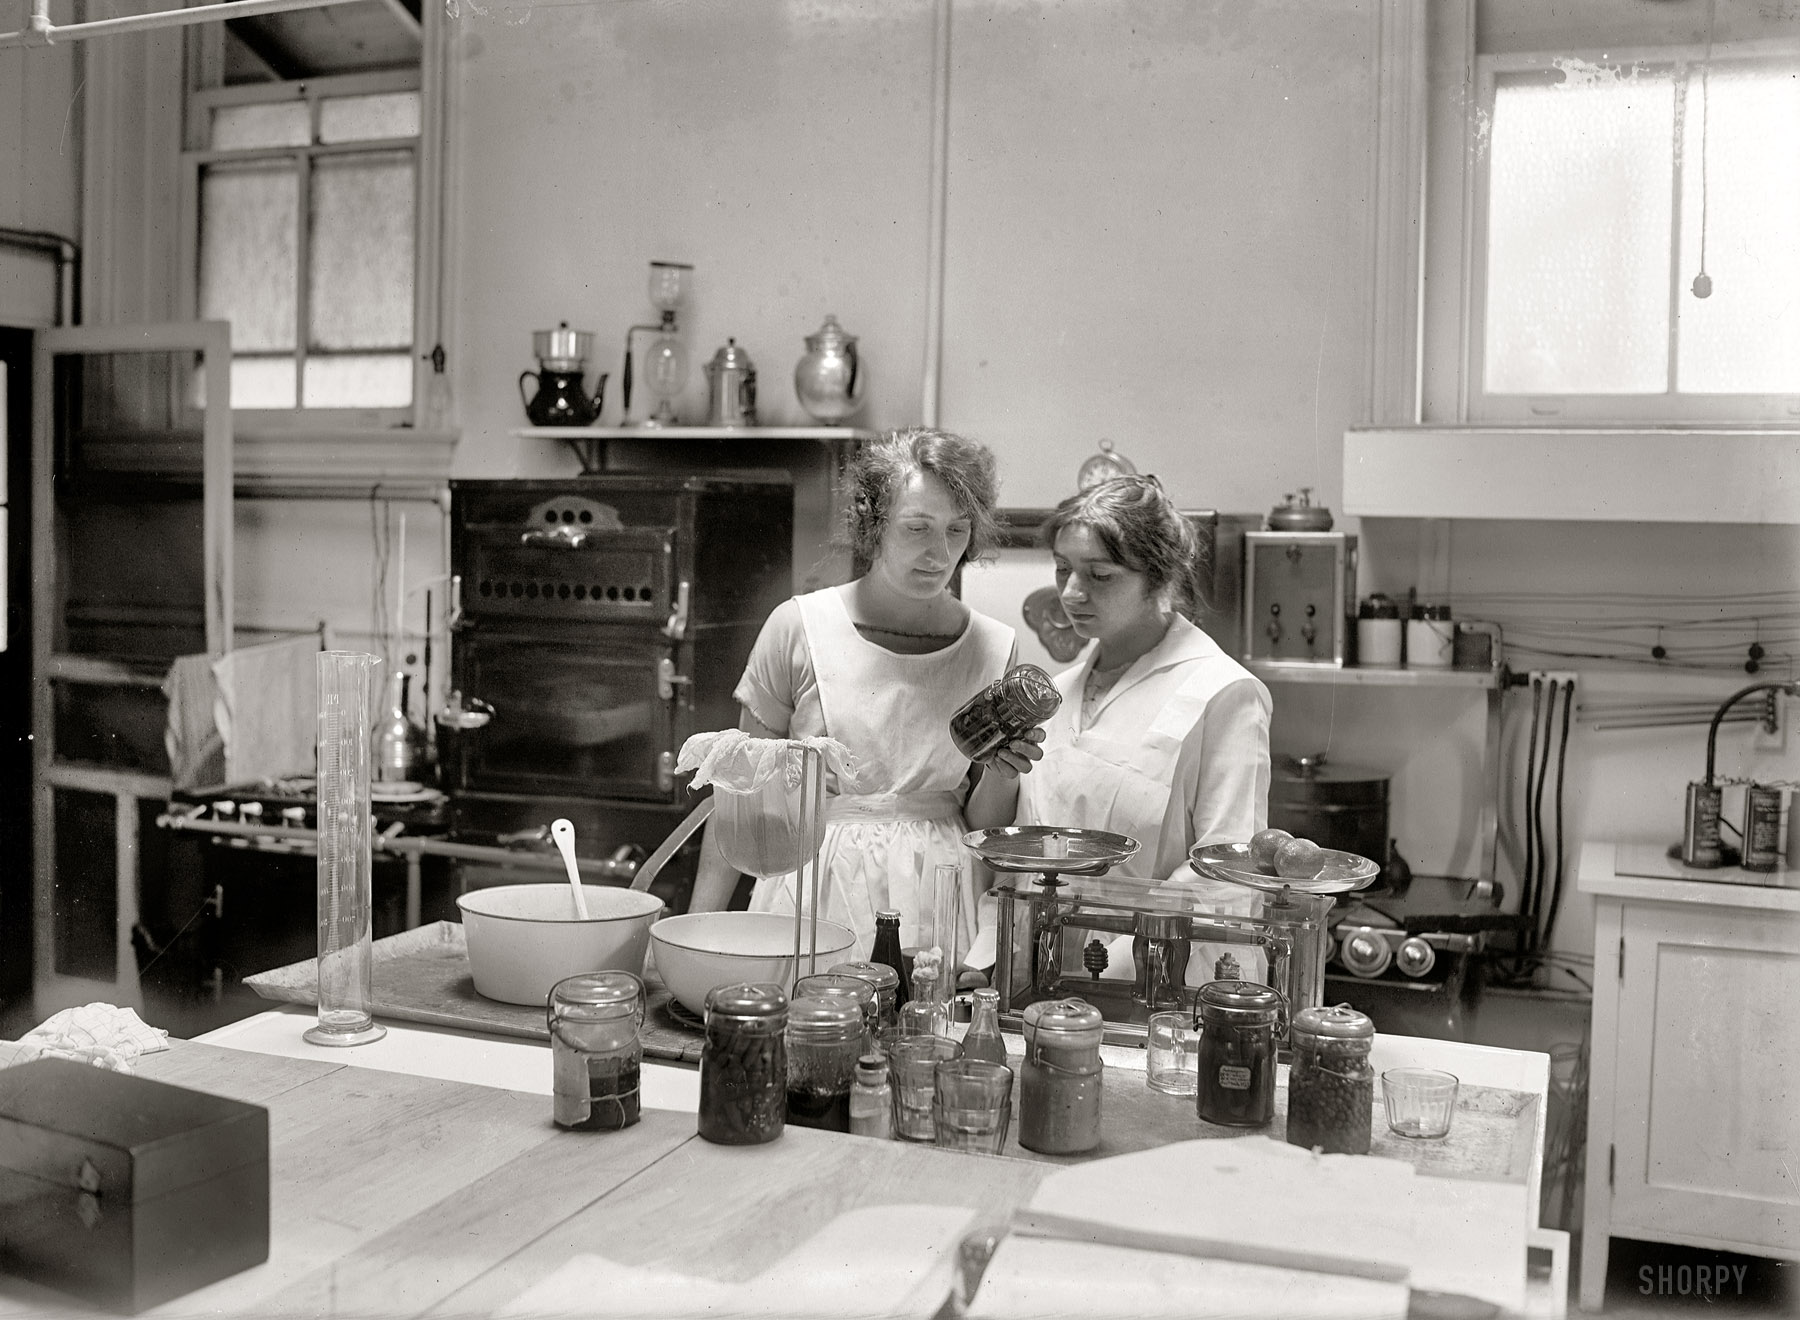 "Two women in kitchen. May 8, 1923." Not just any old kitchen, this is the laboratory where Odessa Dow conducted her ground-breaking baking research. National Photo Company Collection glass negative. View full size.